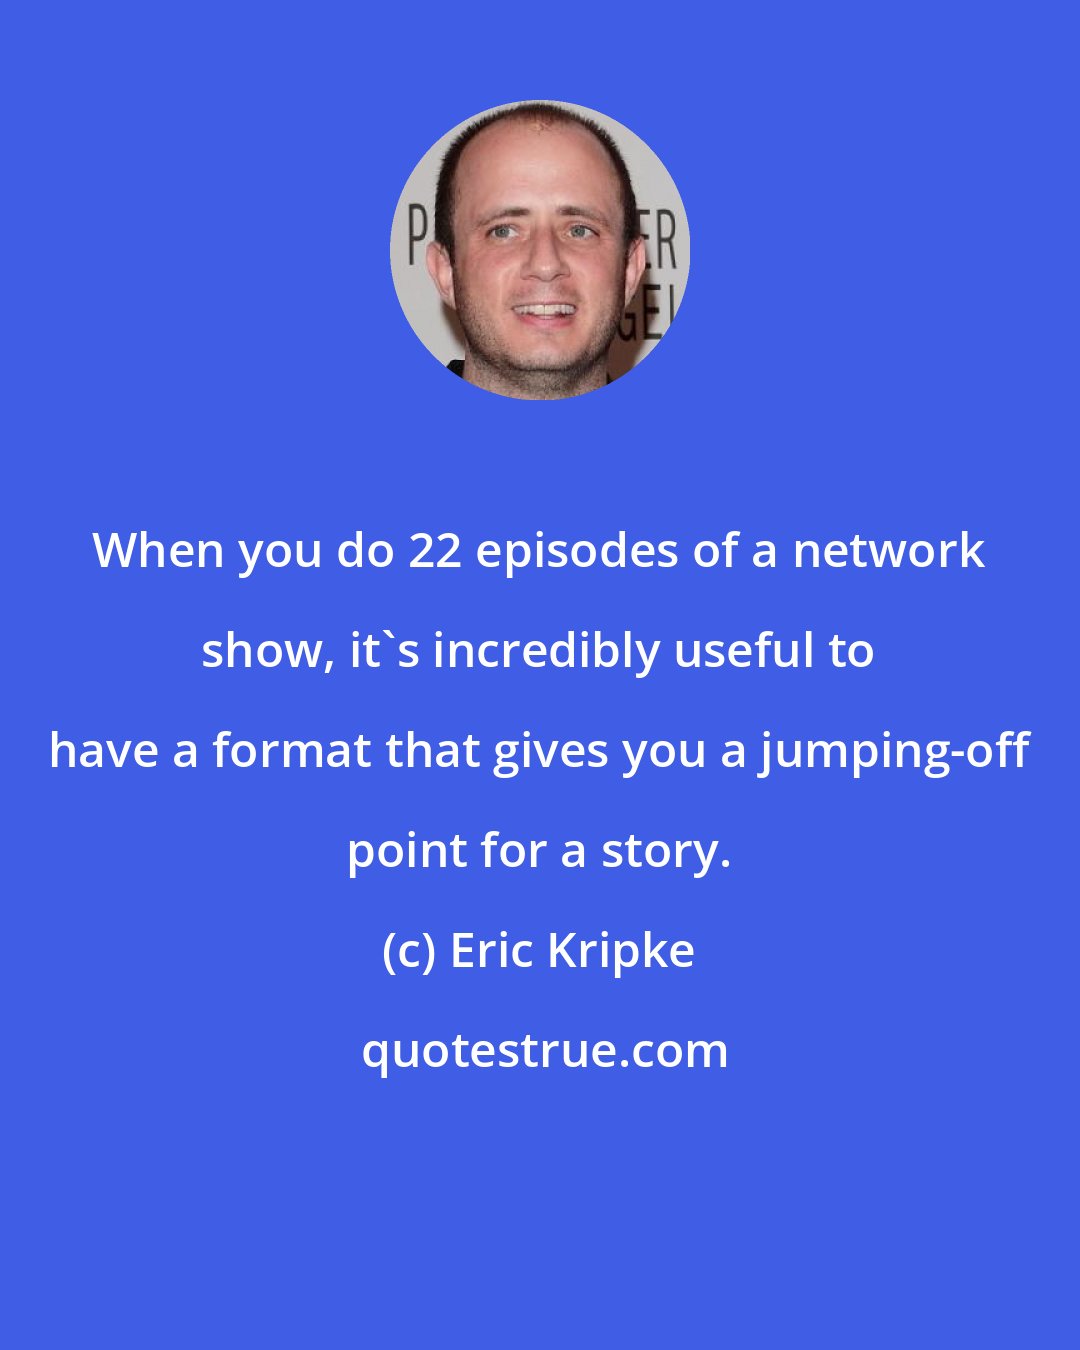 Eric Kripke: When you do 22 episodes of a network show, it's incredibly useful to have a format that gives you a jumping-off point for a story.